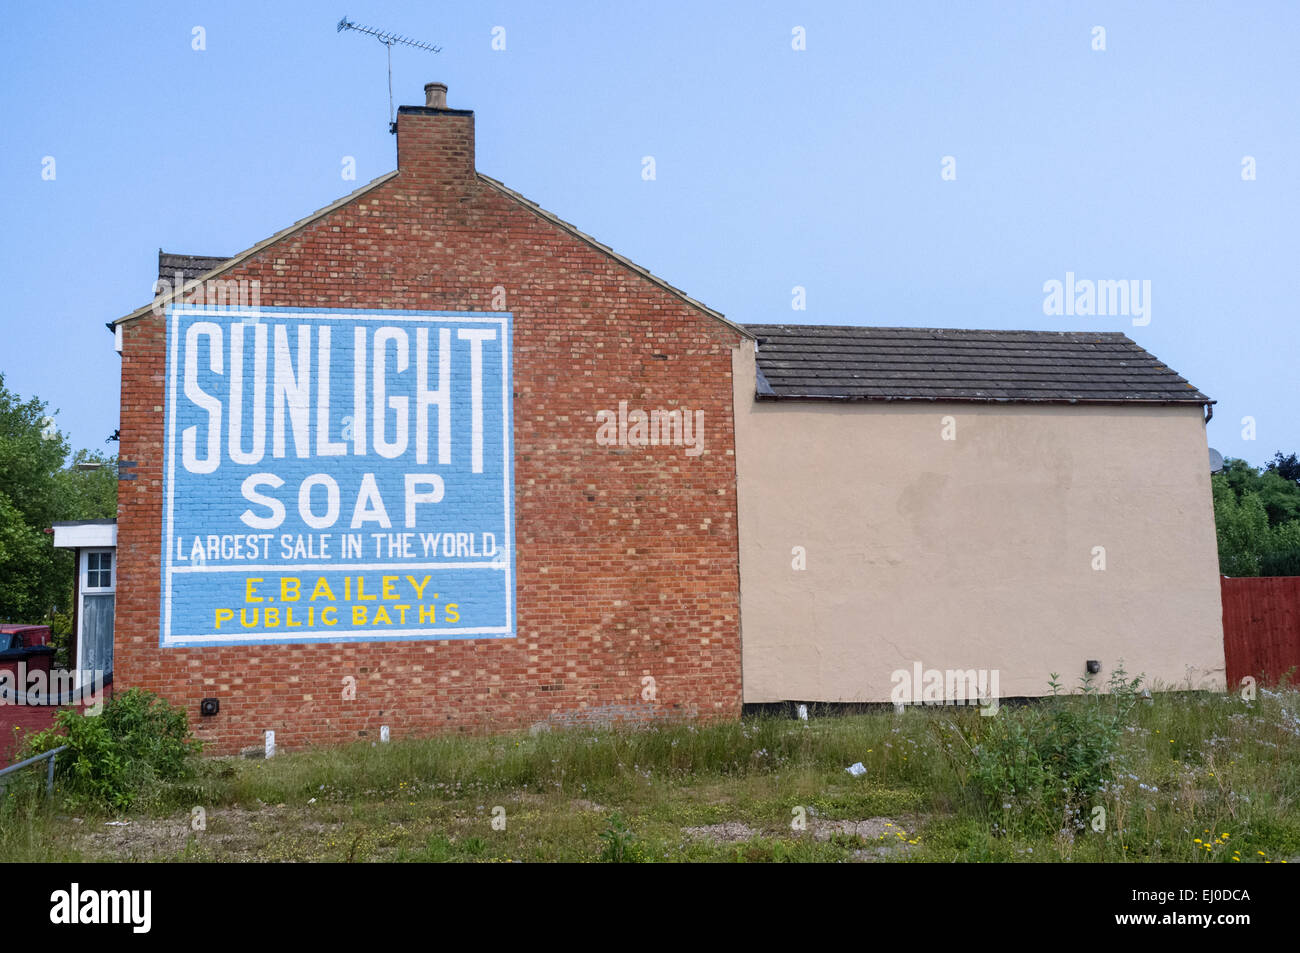 Sunlight Soap advertisement in Bletchley Stock Photo